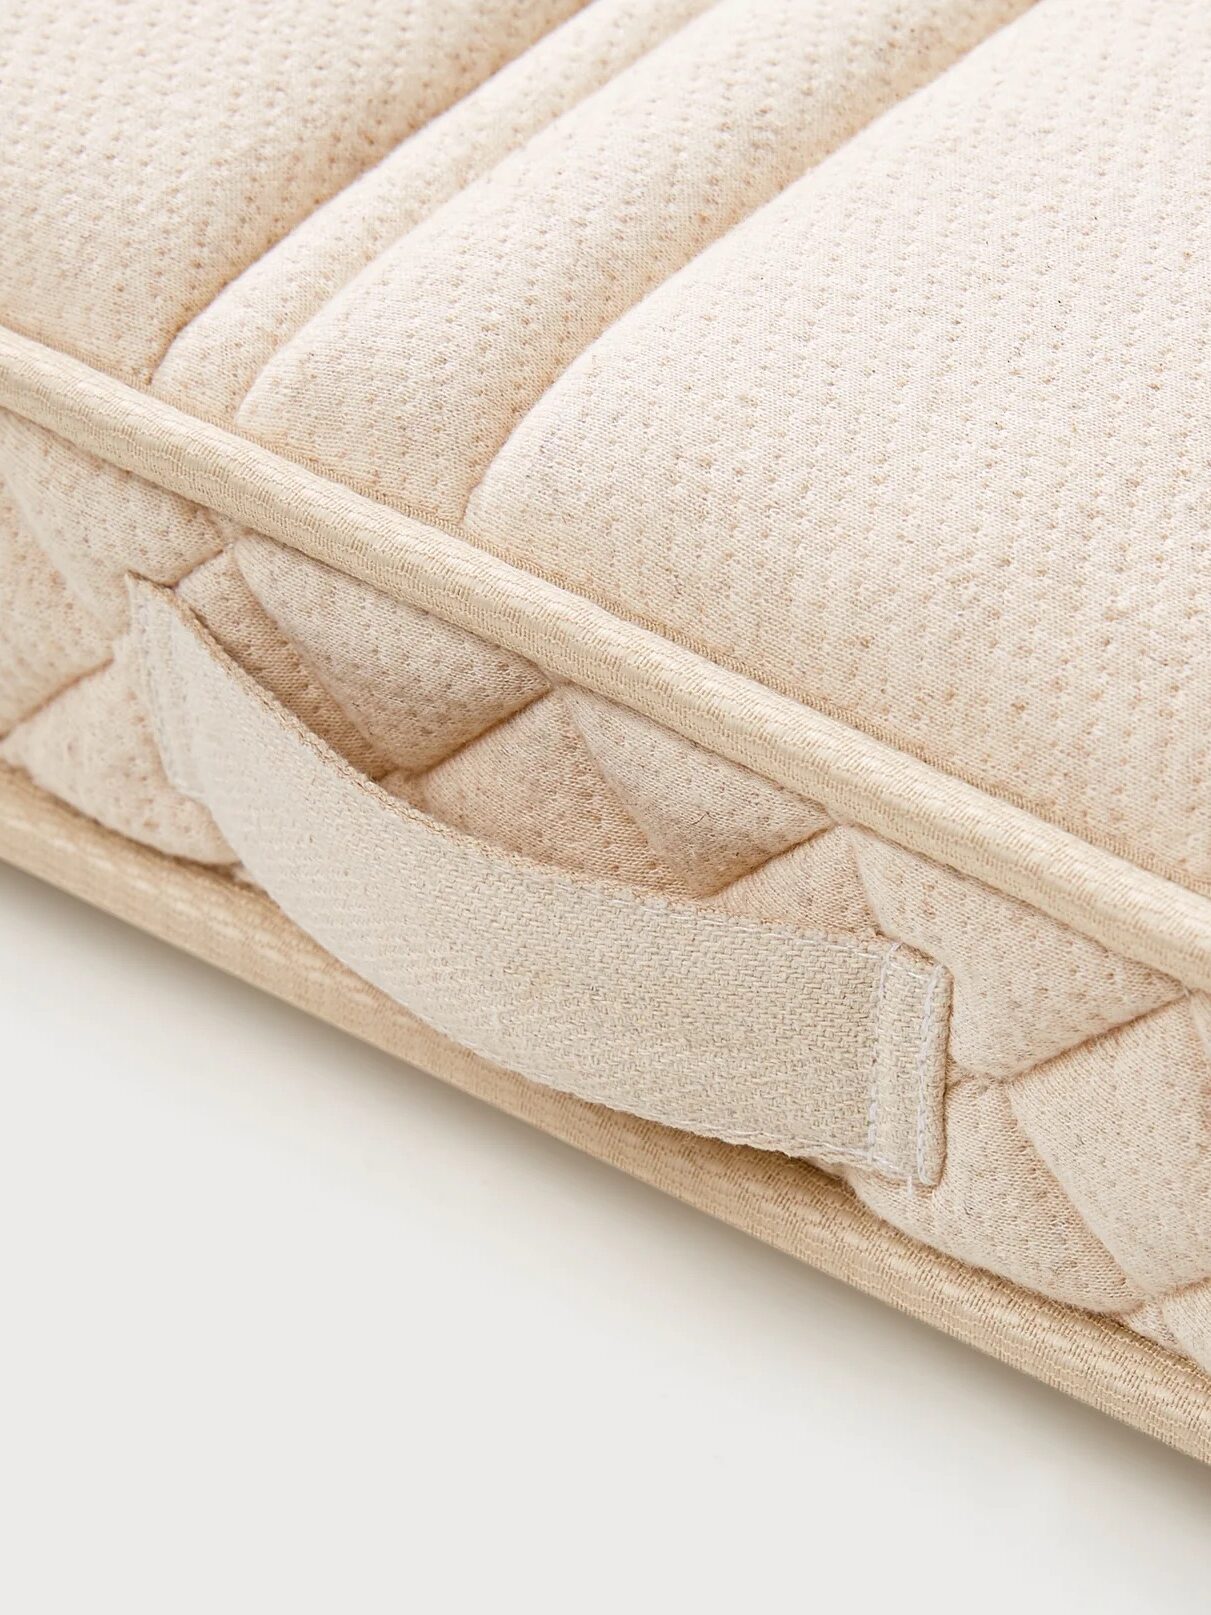 Close-up of a beige fabric mattress corner with a handle.